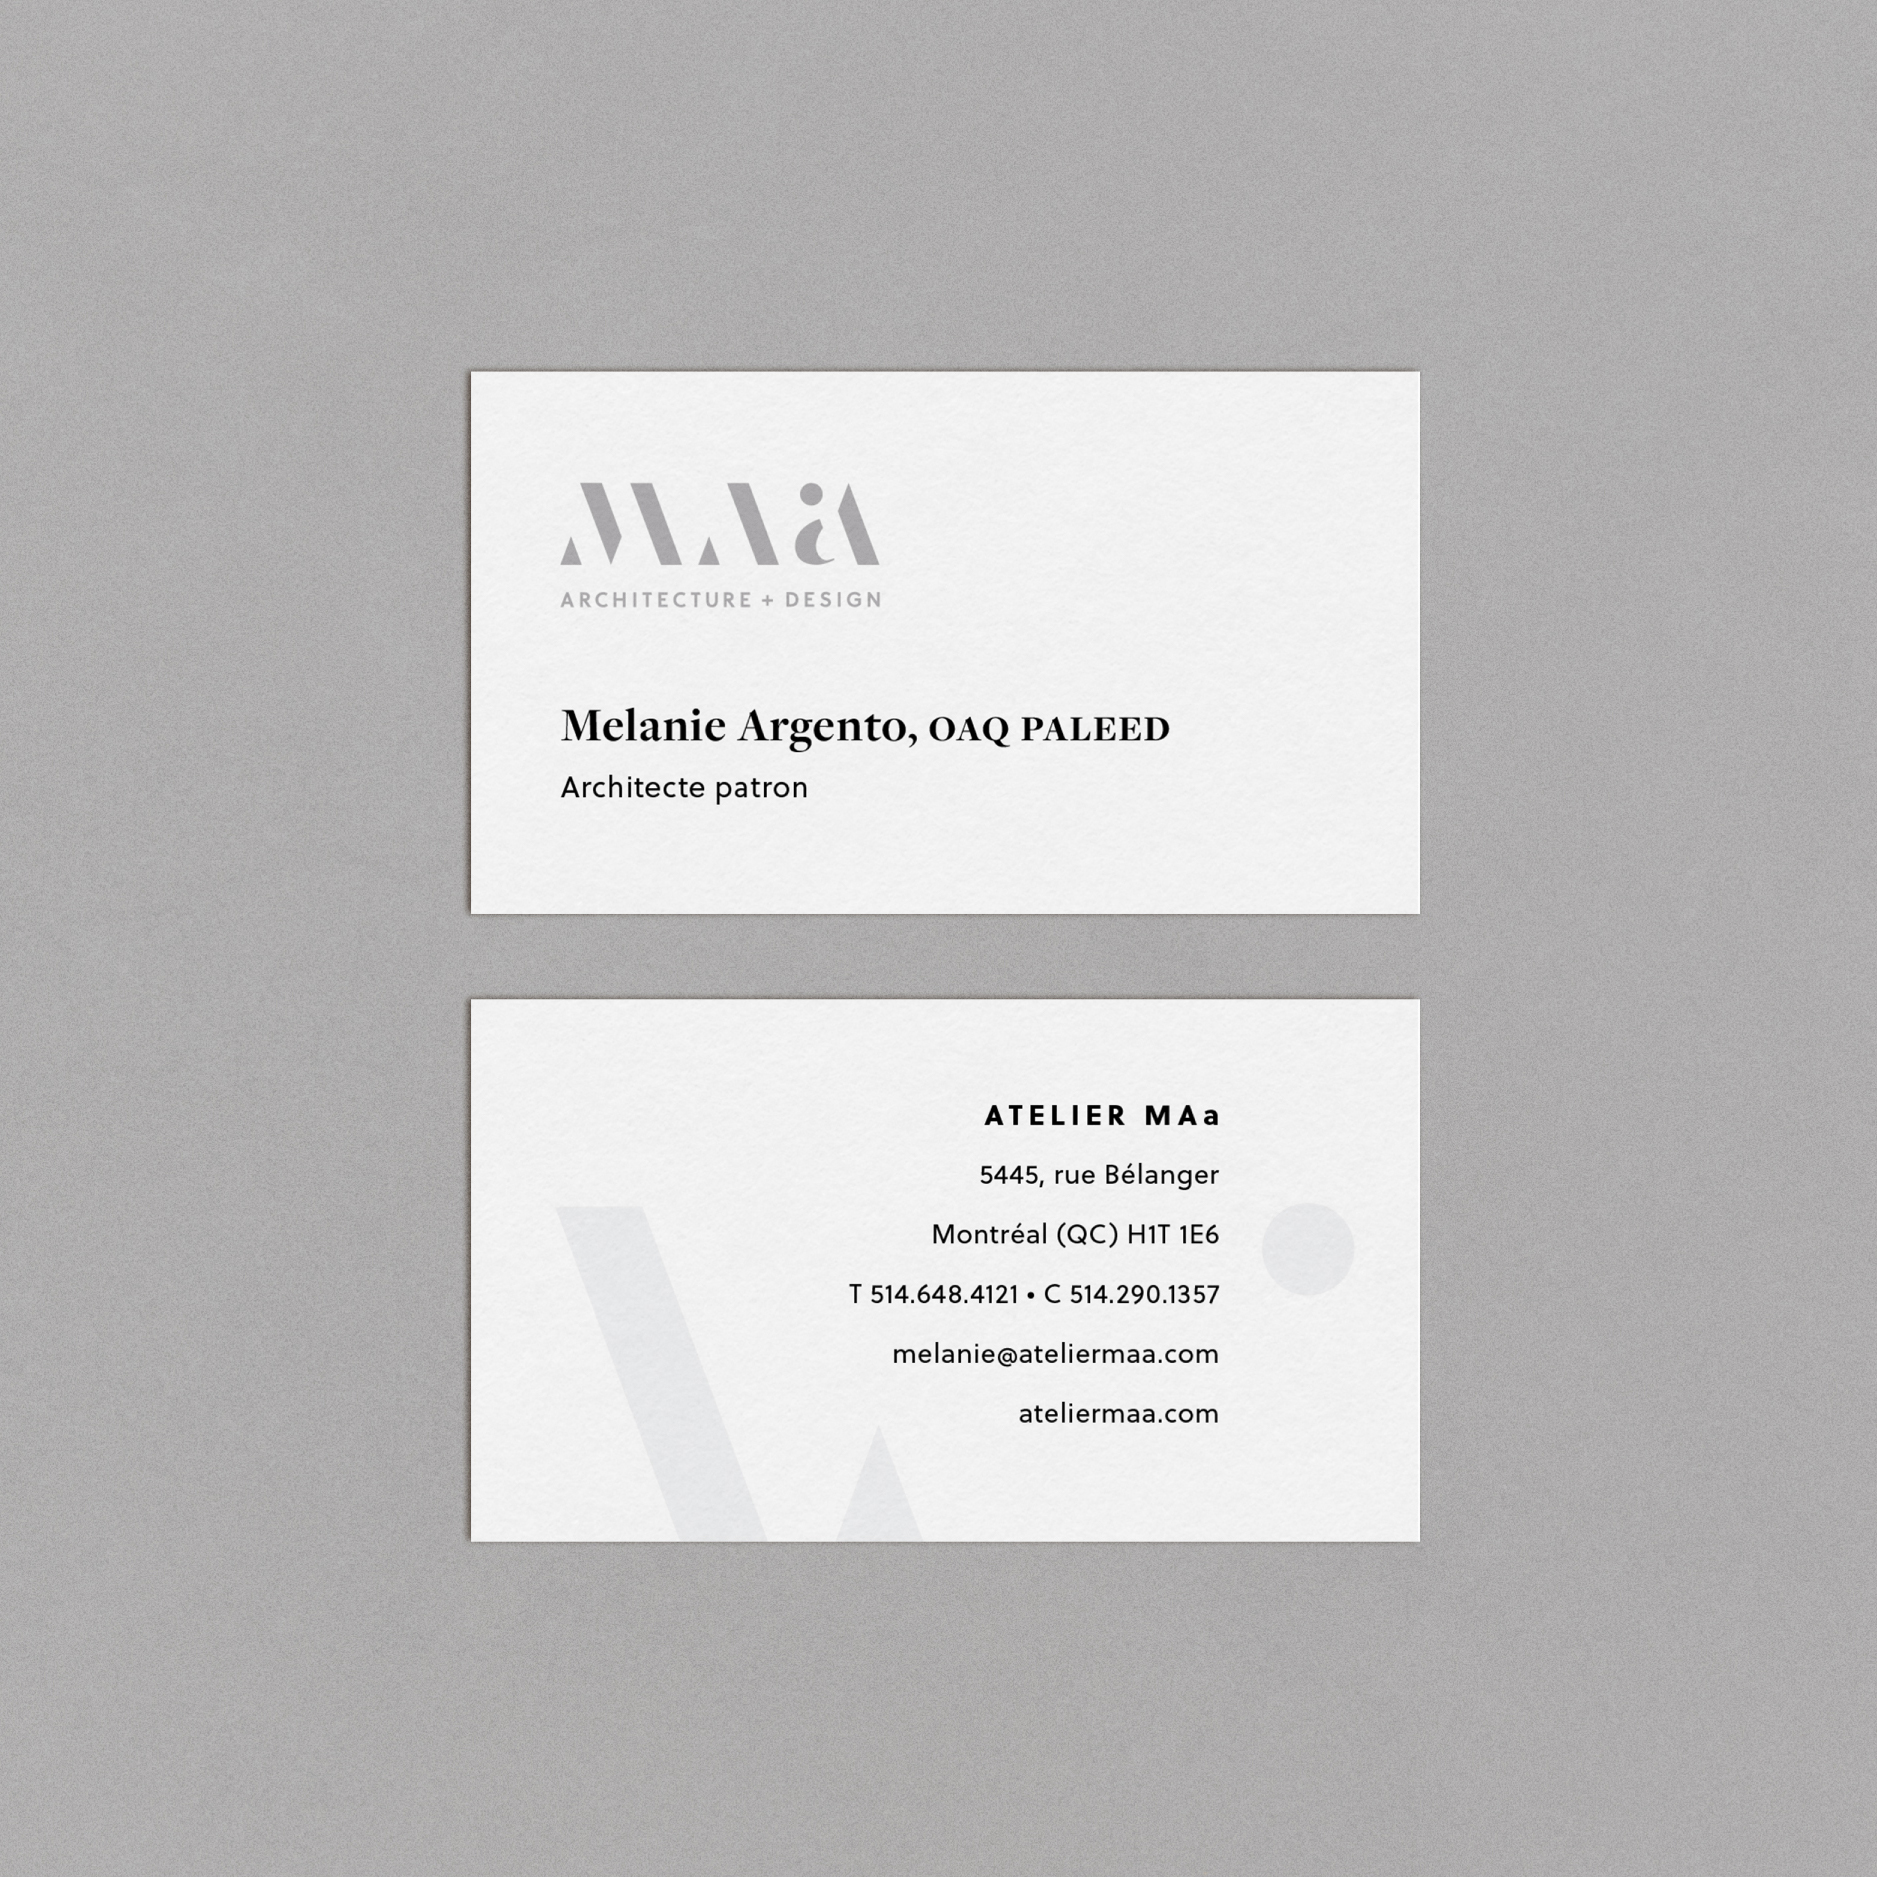 Architect Firm, Business cards and Branding Design